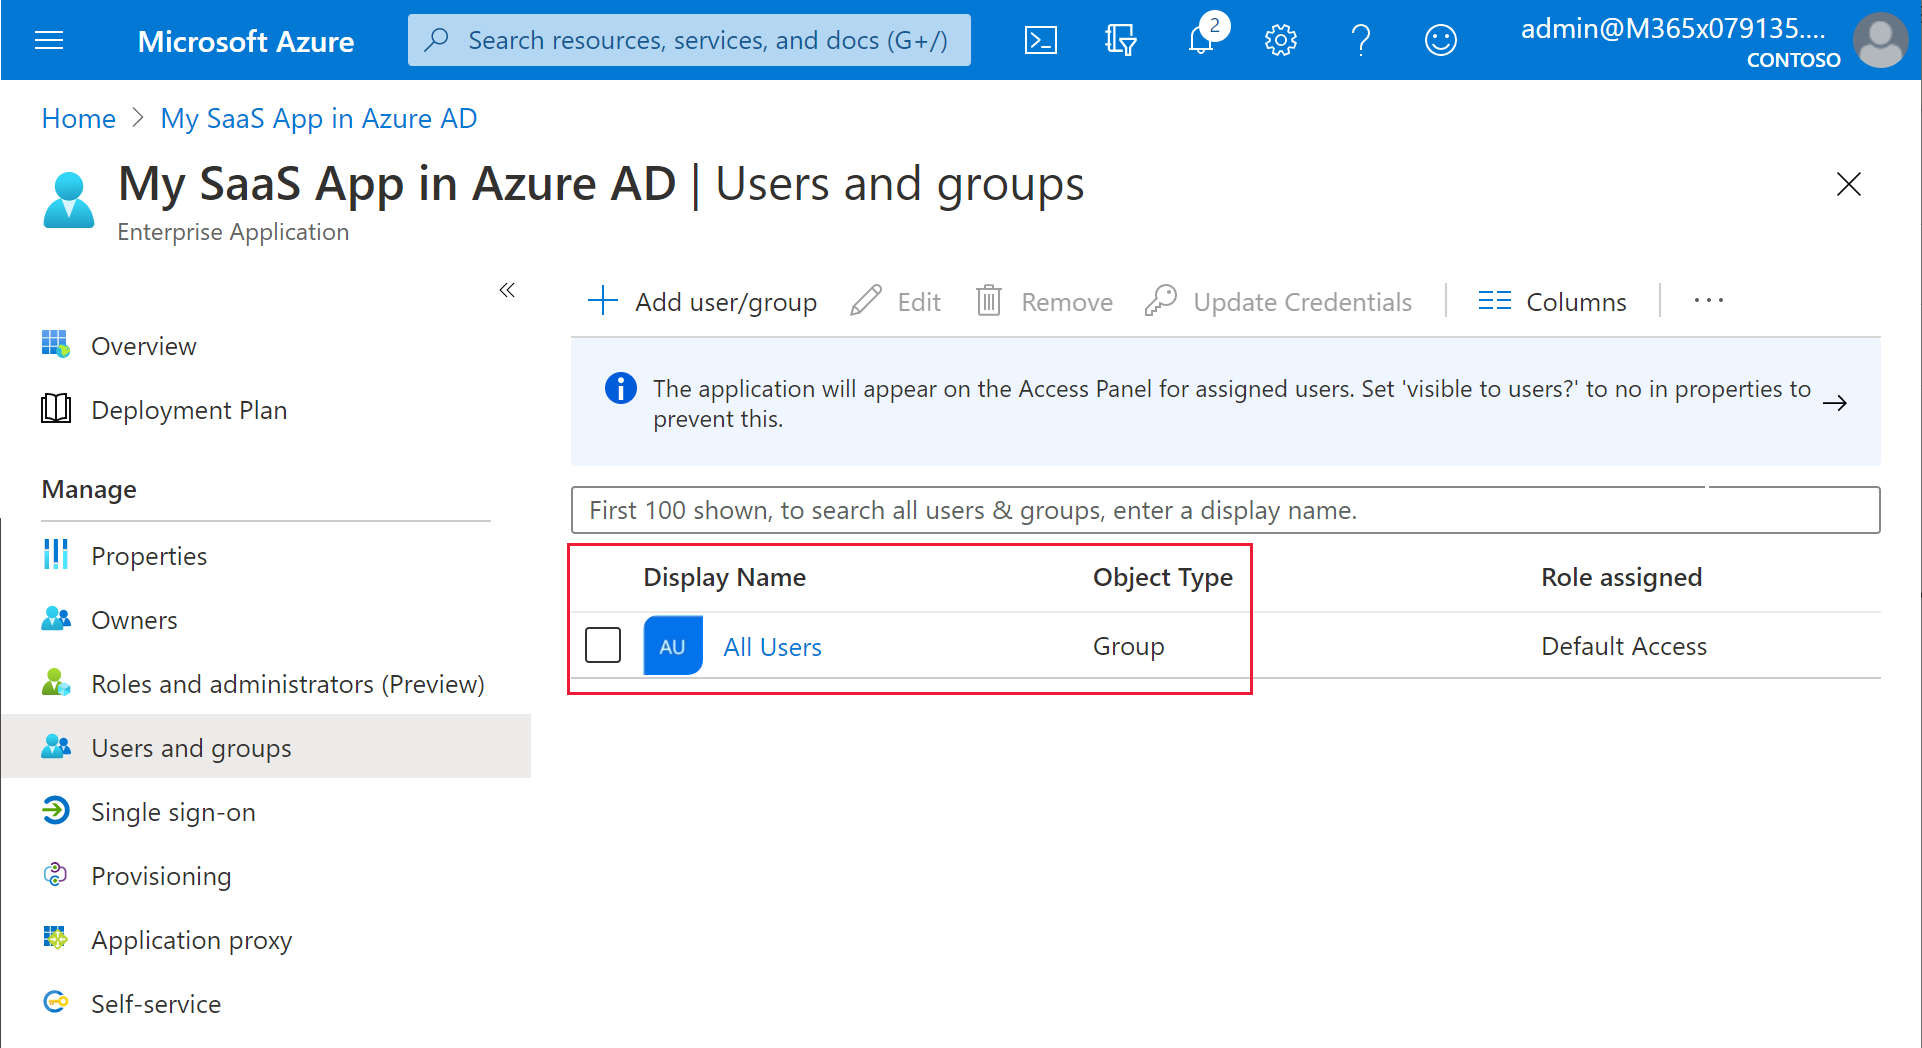 My SaaS Apps in Azure AD 